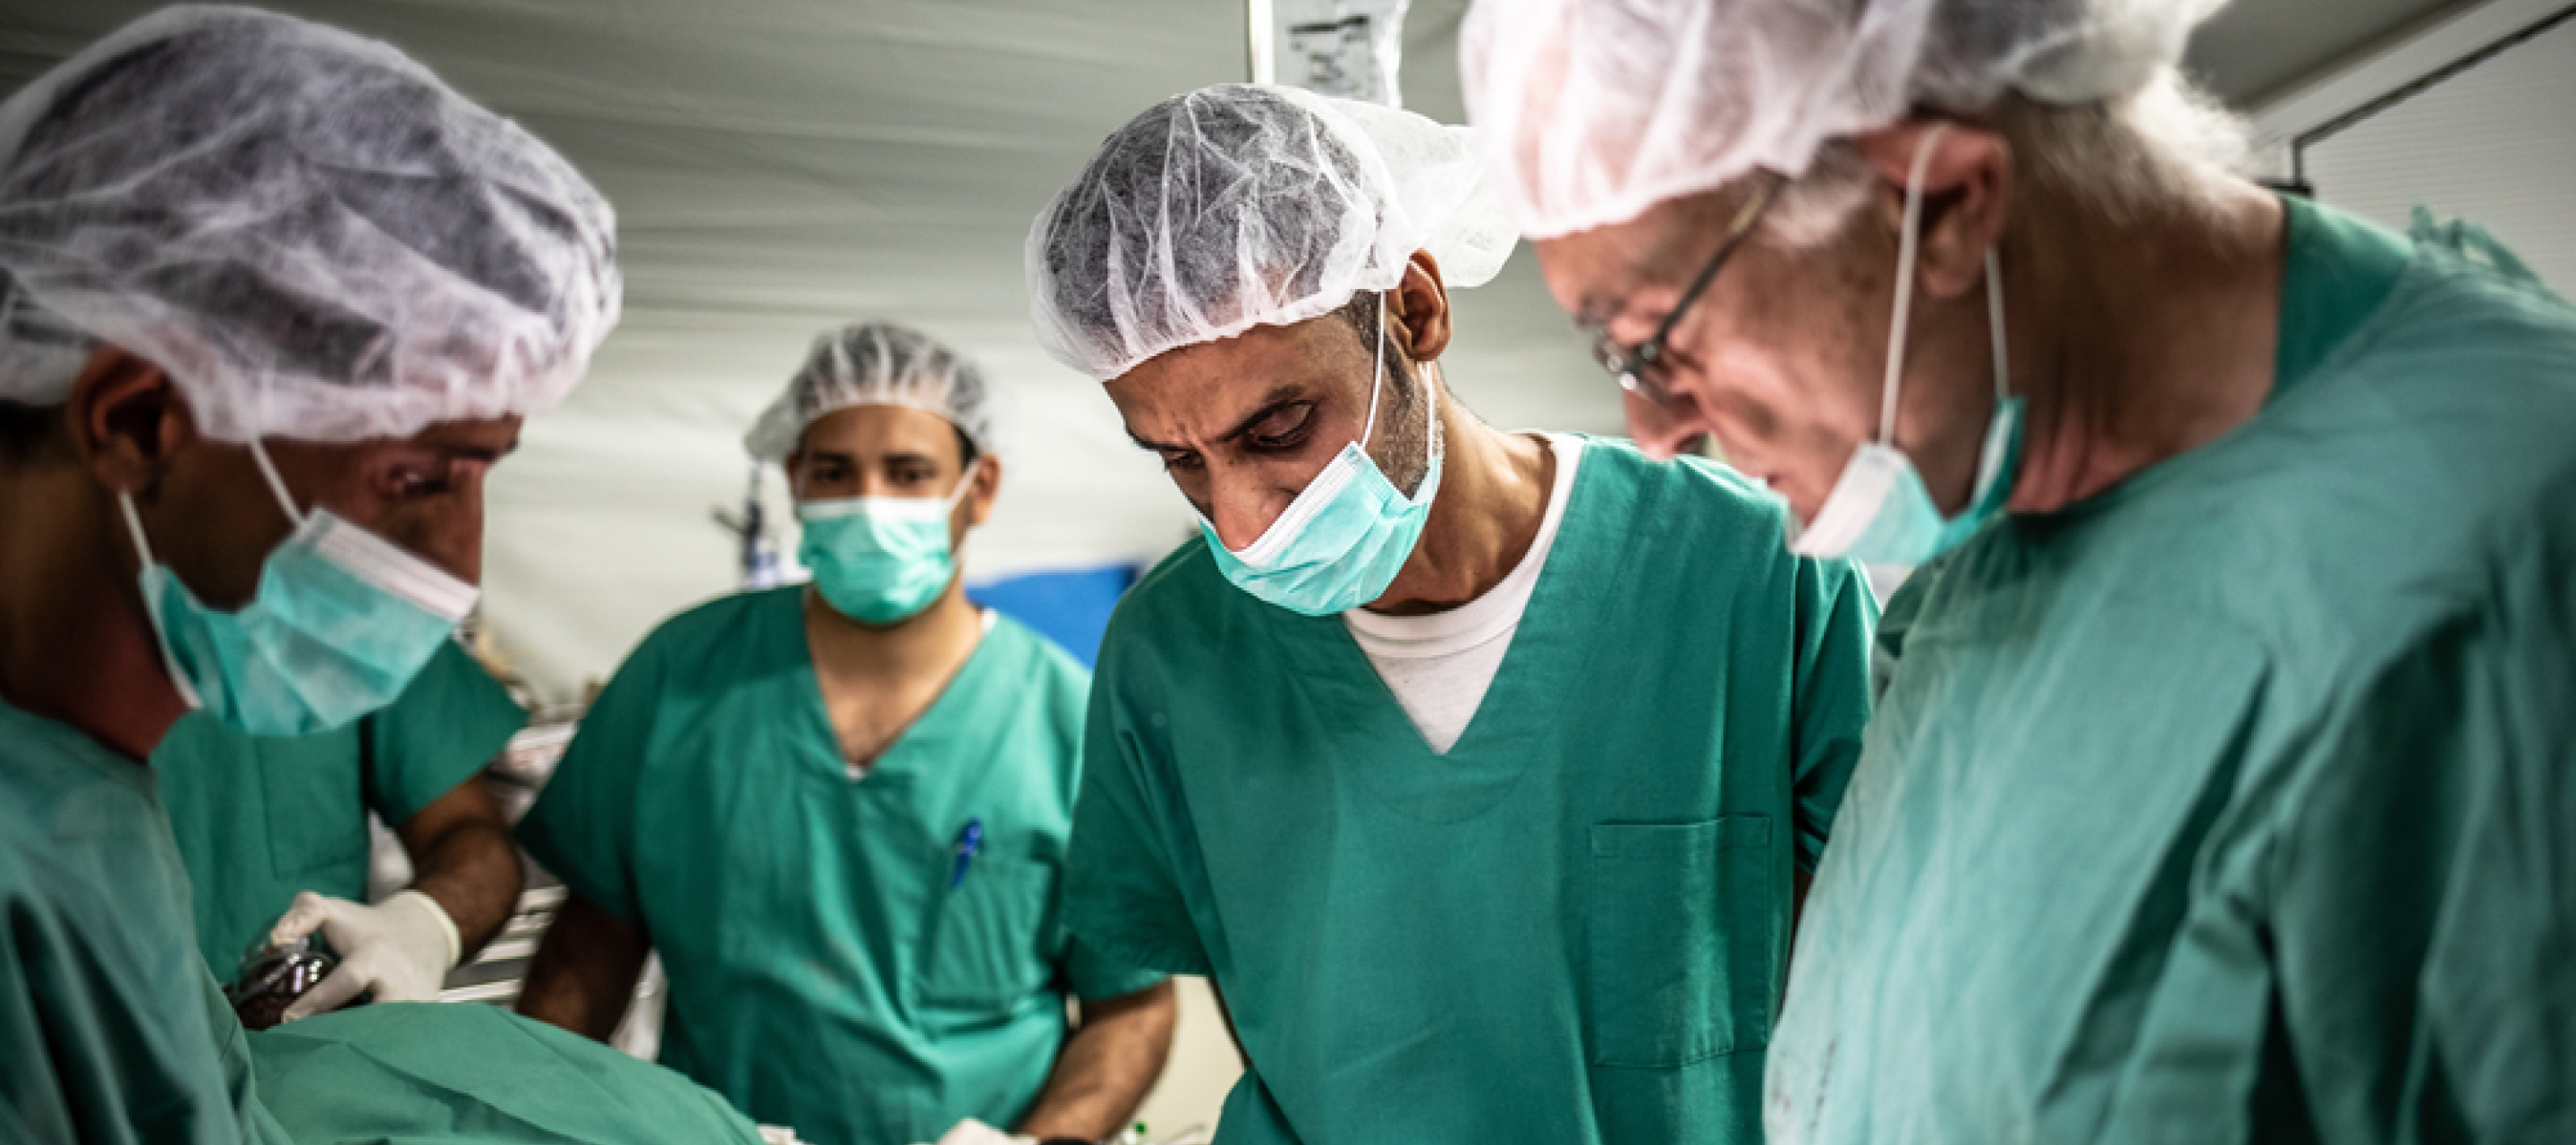 Surgical staff in operating theatre